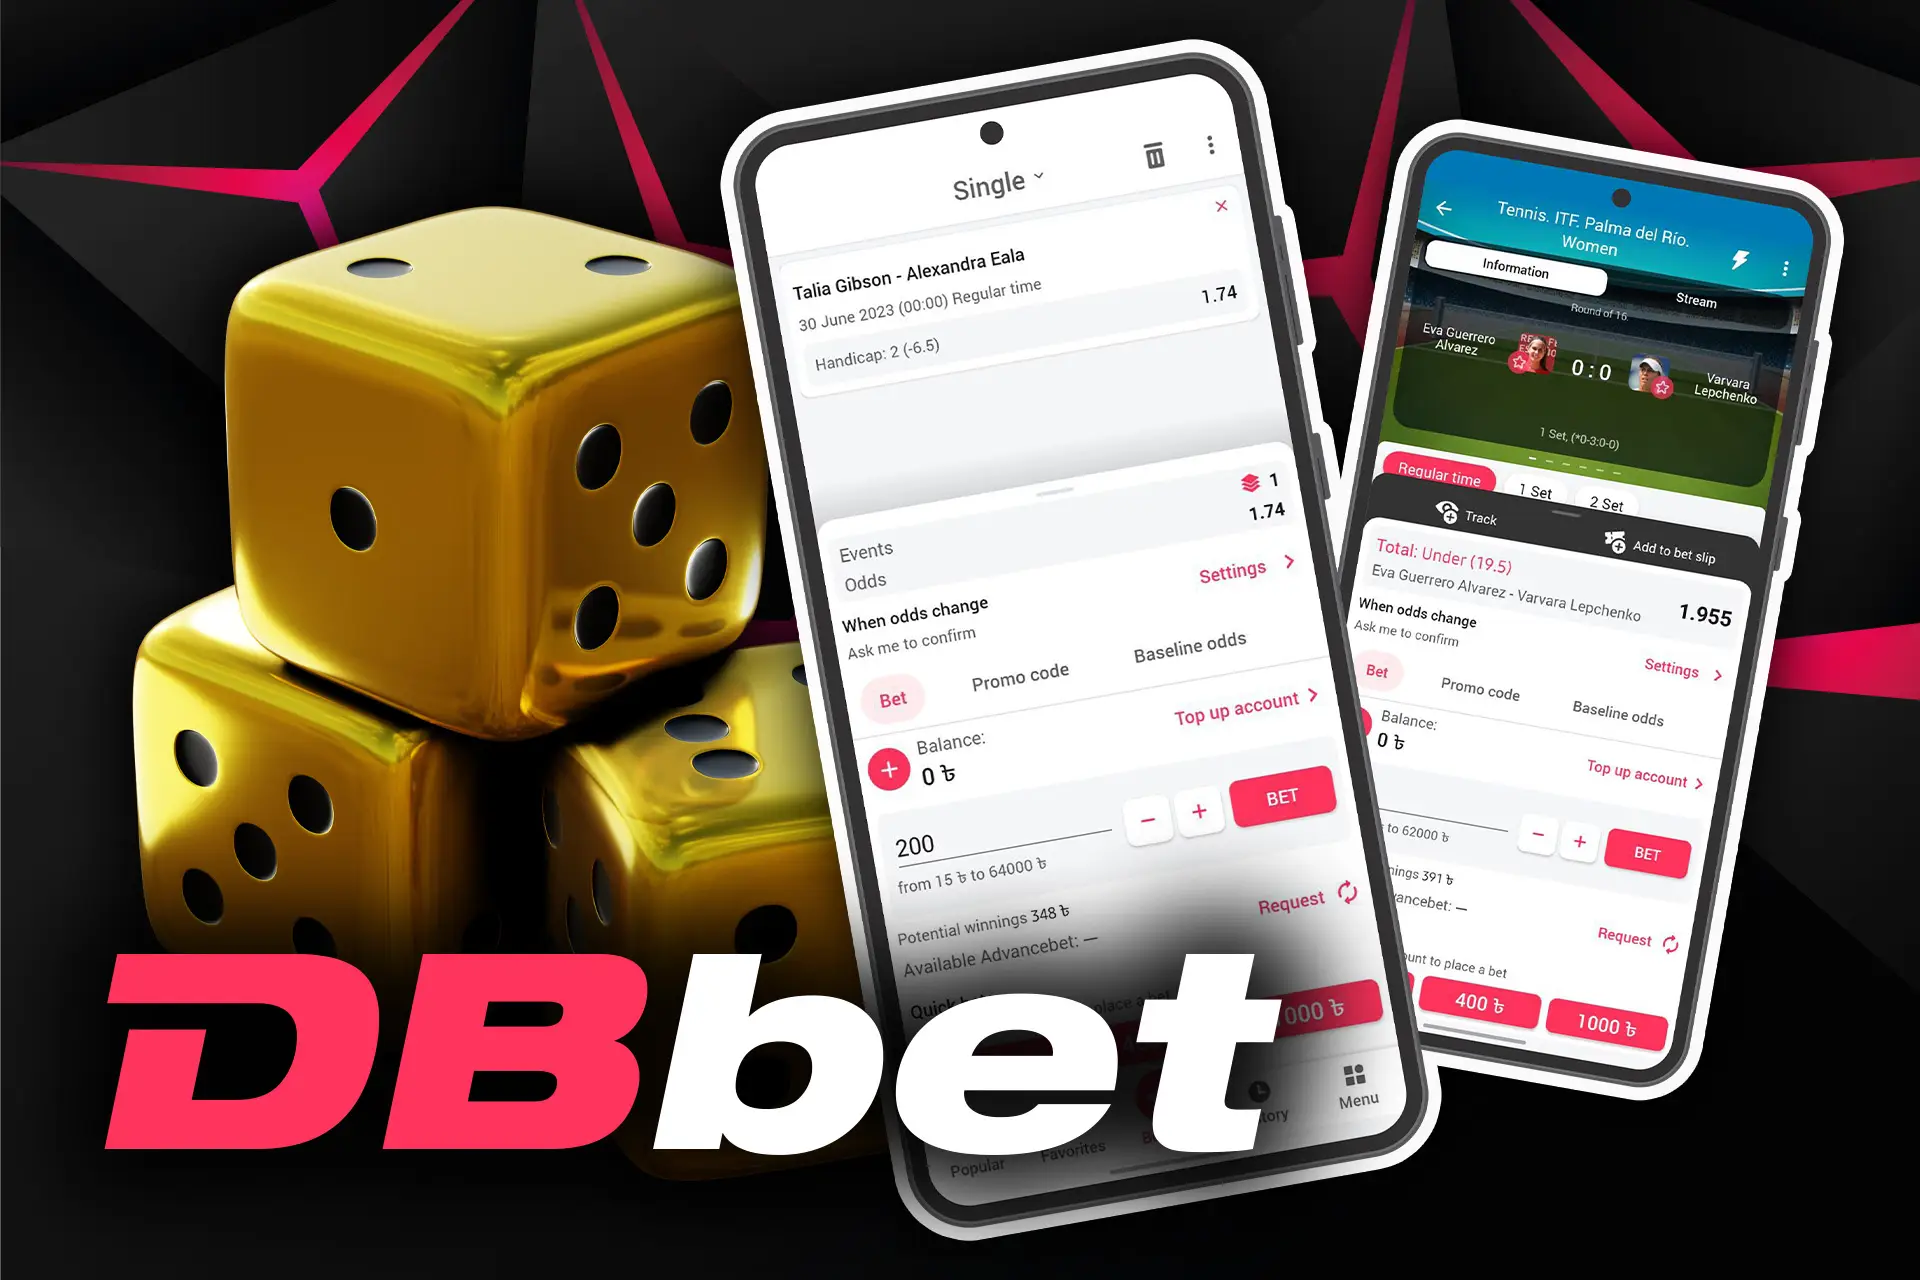 The DBbet app gives you access to various types of sports betting.